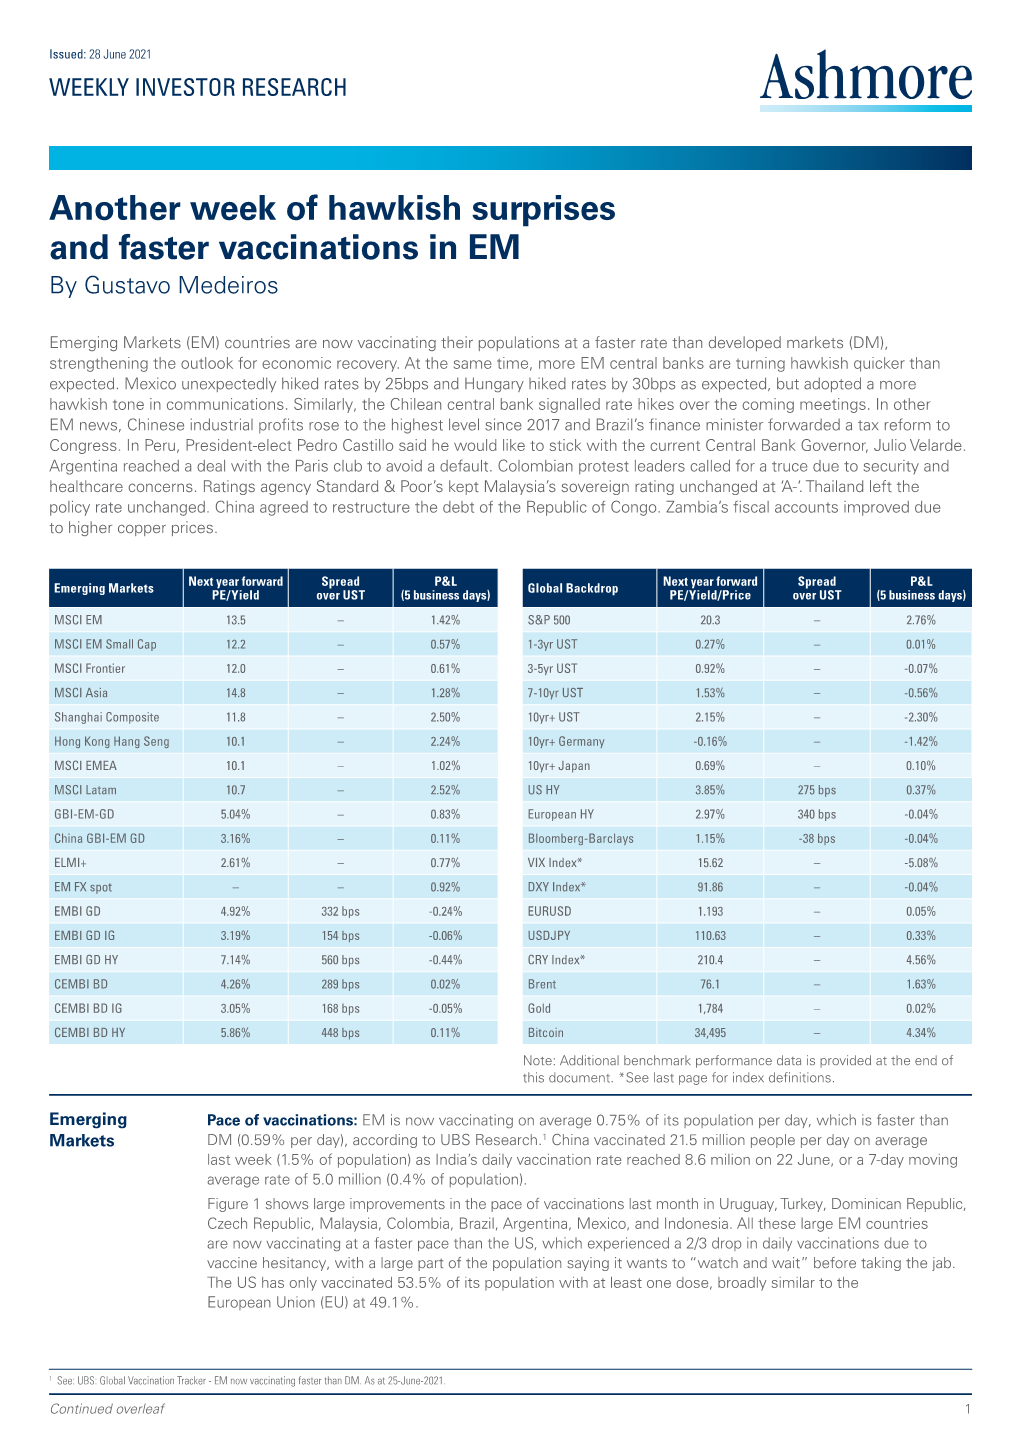 Another Week of Hawkish Surprises and Faster Vaccinations in EM by Gustavo Medeiros